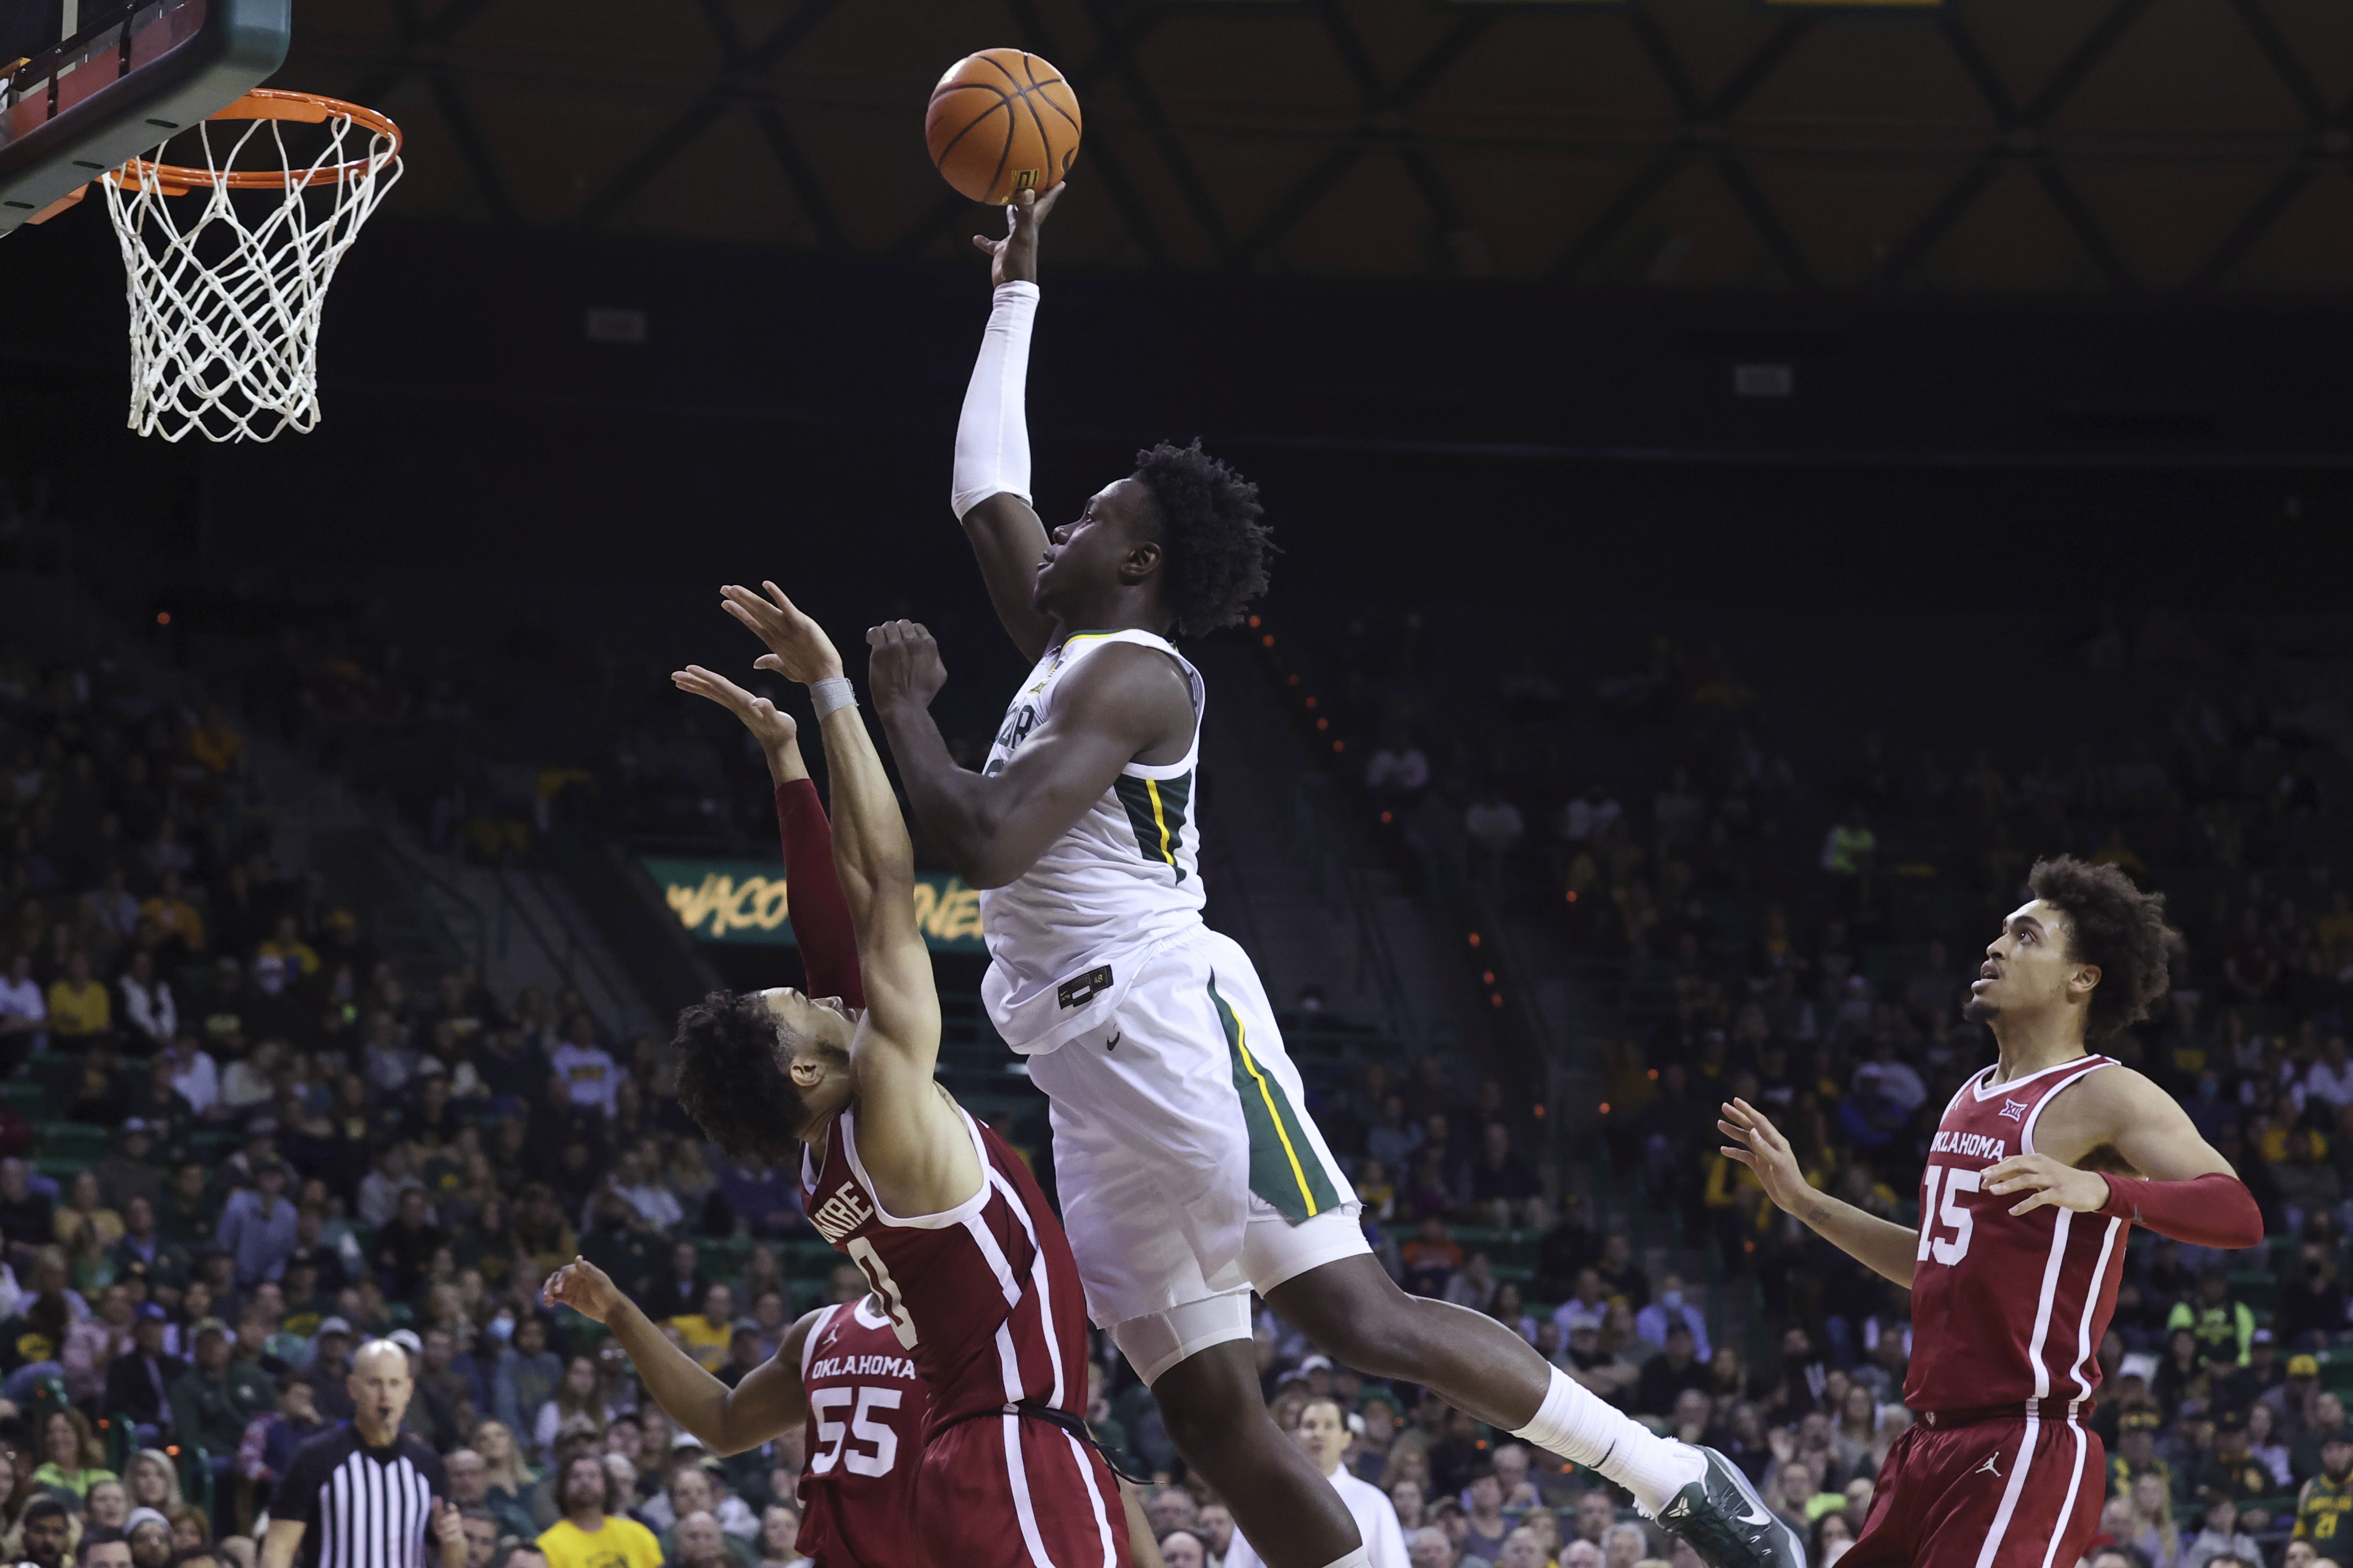 Top-ranked Baylor beats Oklahoma 84-74 for 20th win in row